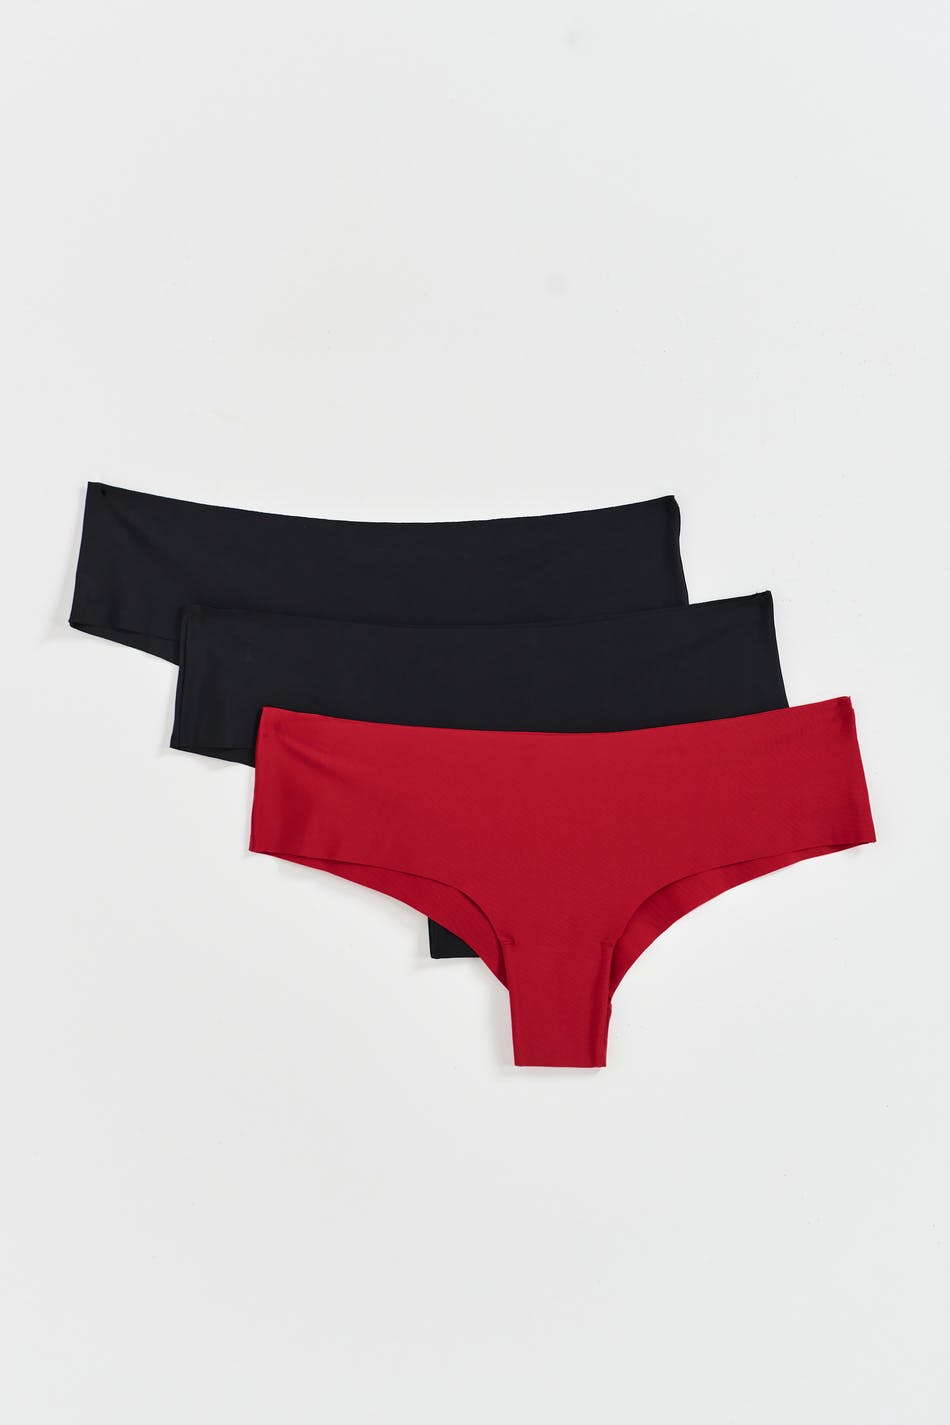 Gina Tricot - 3-pack invisible brazilian - trosor-3-pack - Red - XL - Female